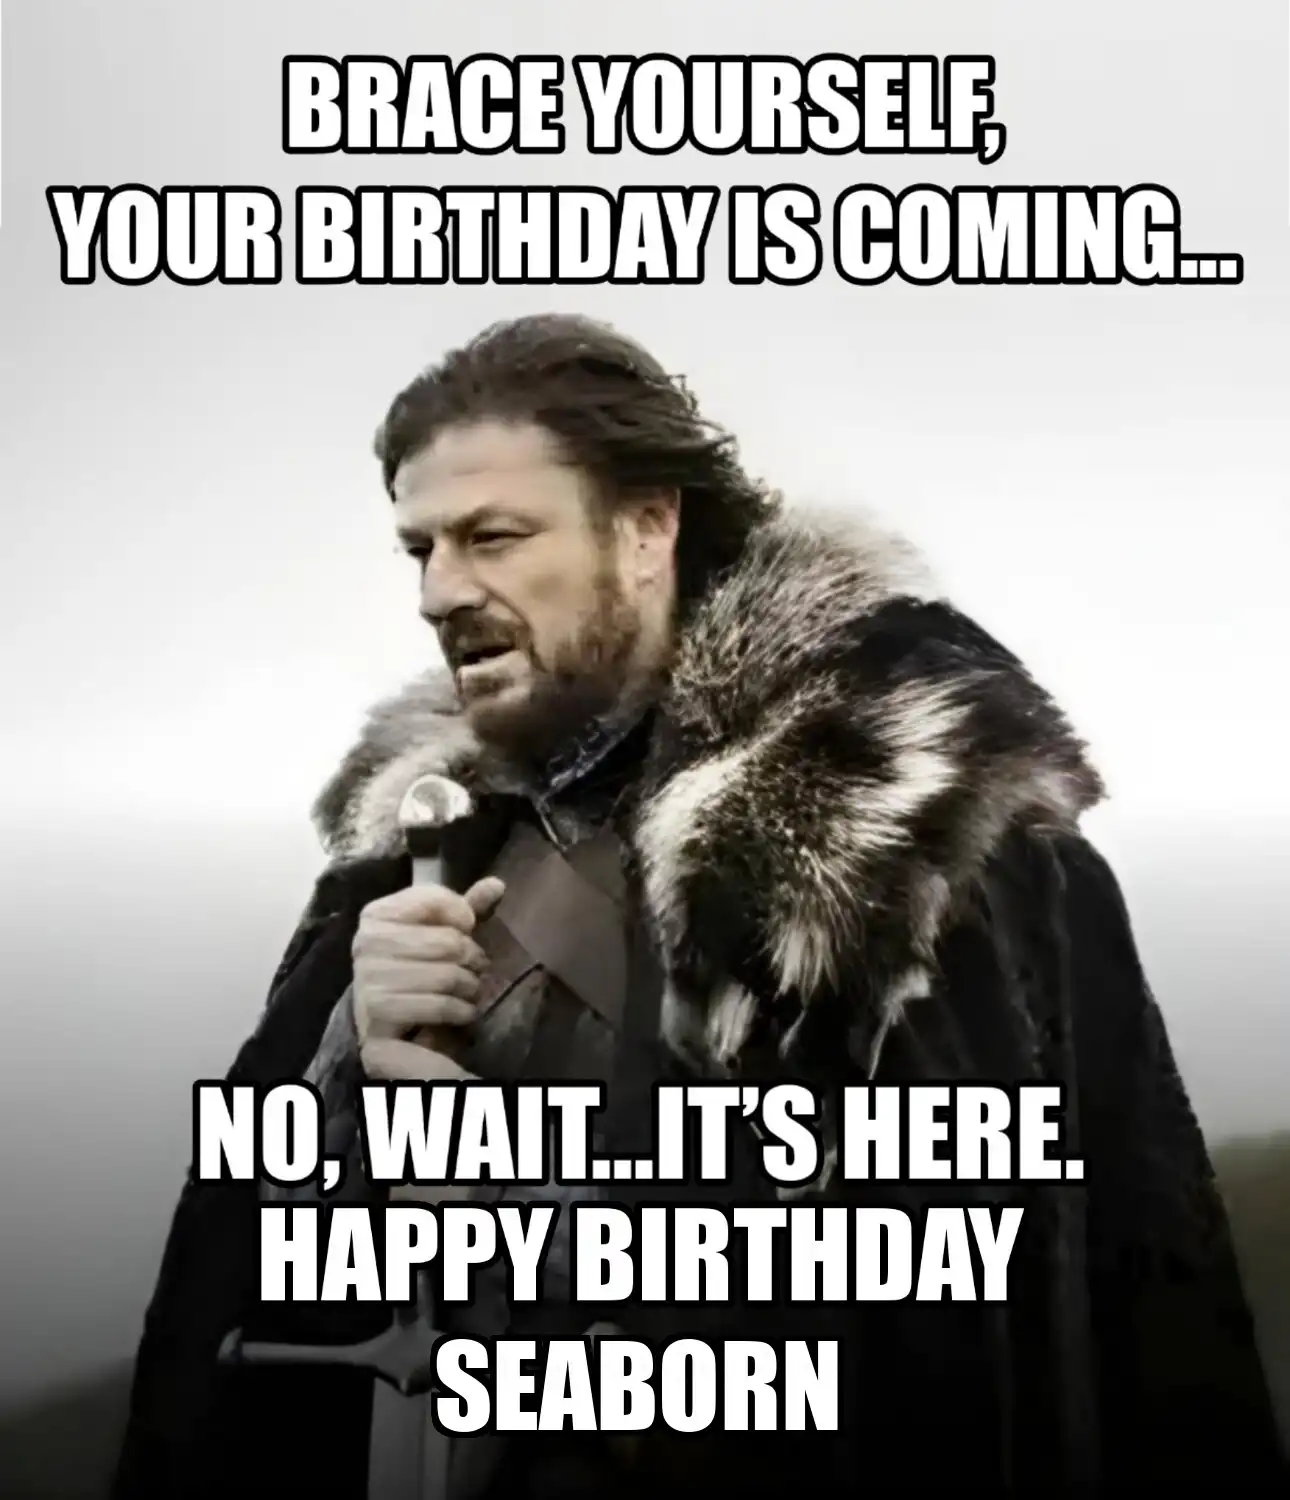 Happy Birthday Seaborn Brace Yourself Your Birthday Is Coming Meme